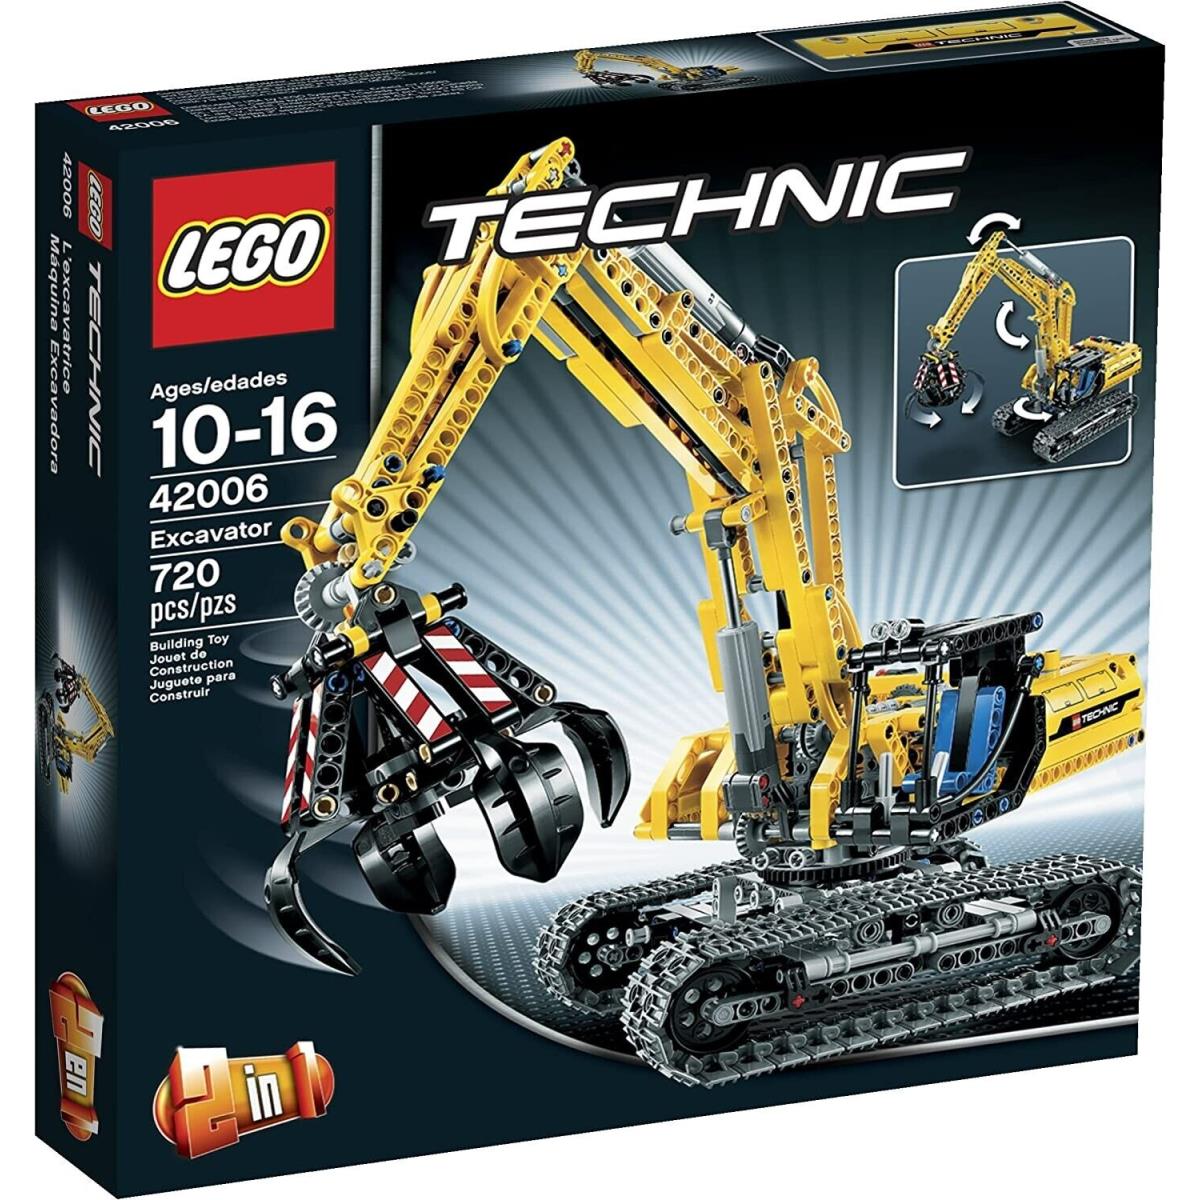 Lego Technic 42006 2-in-1 Excavator Set Retired Hard to Find